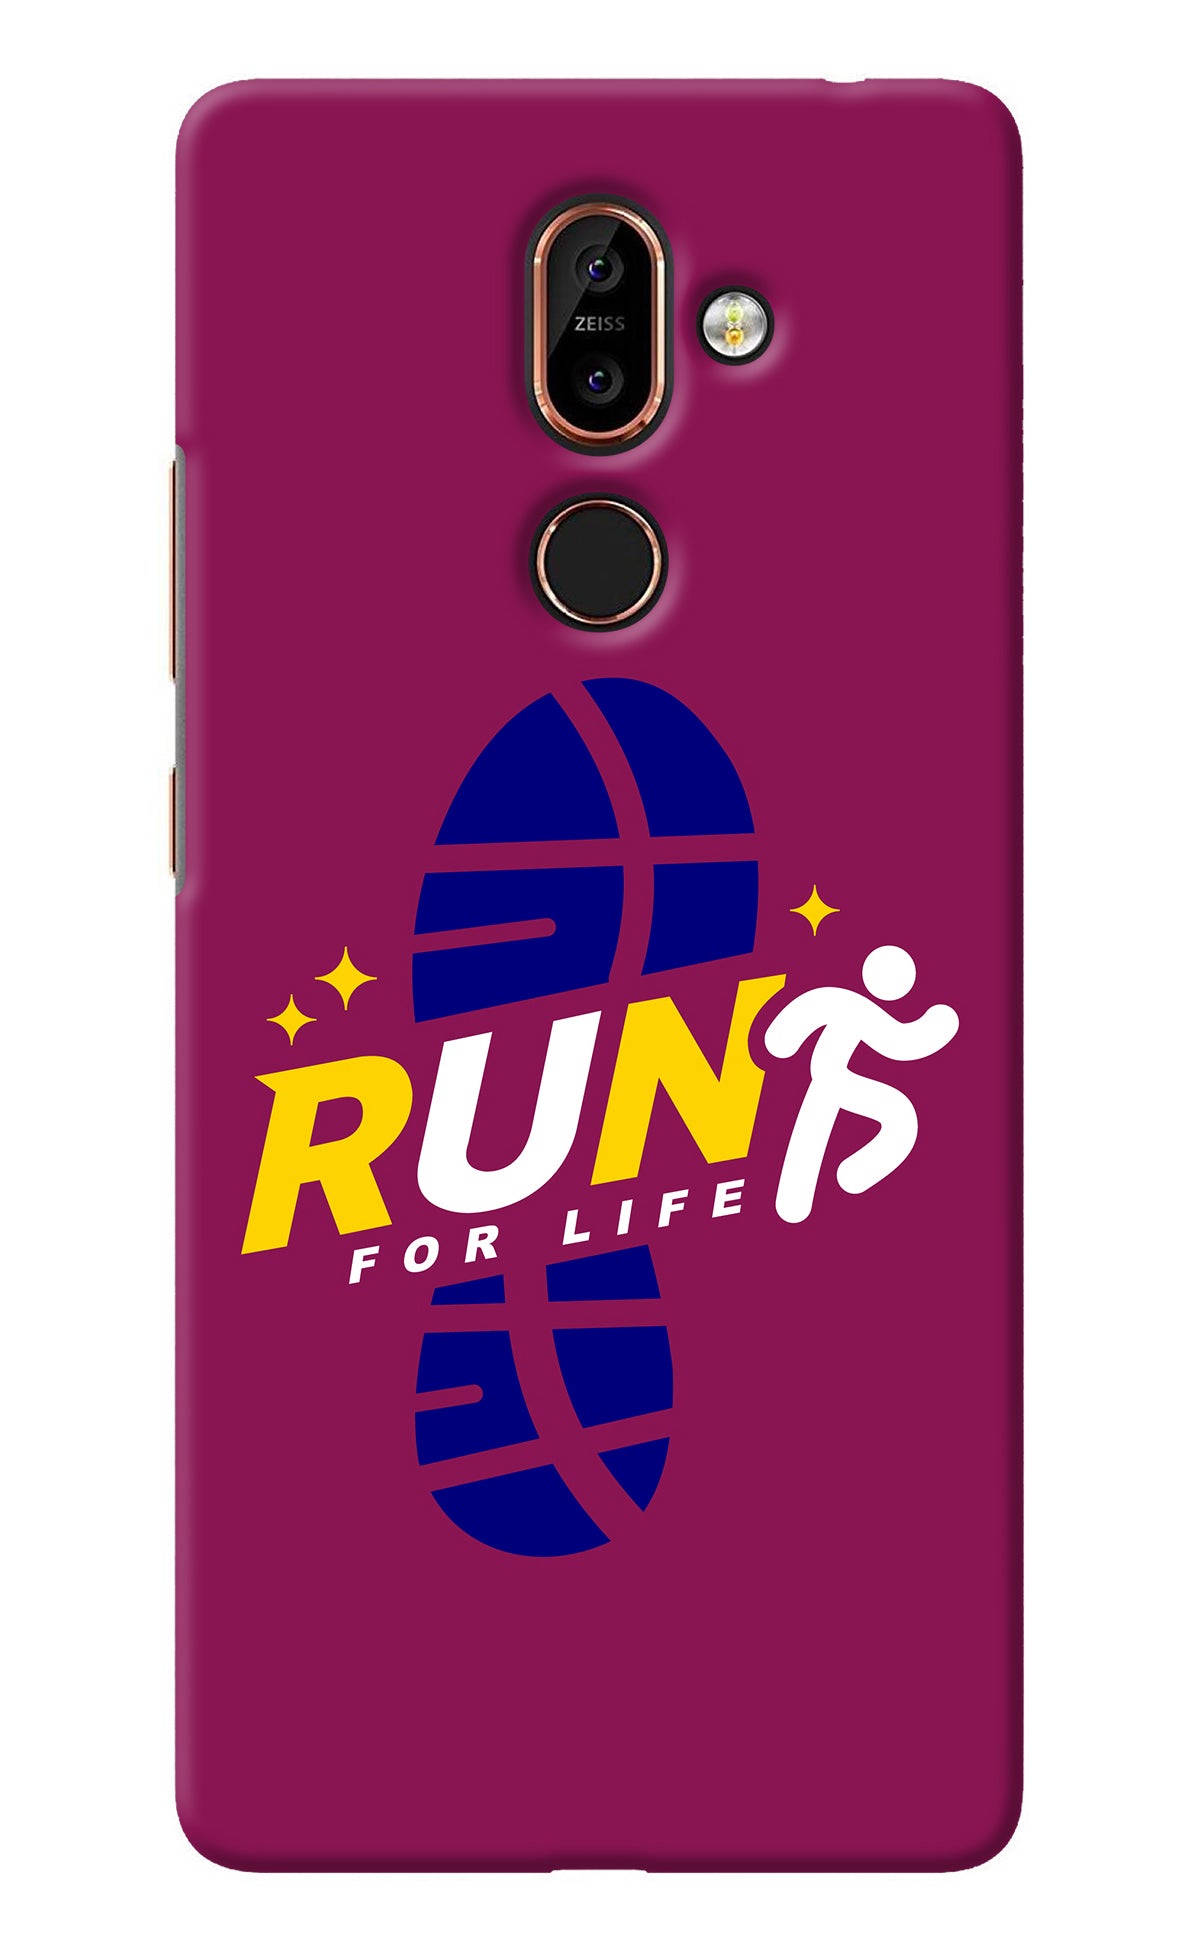 Run for Life Nokia 7 Plus Back Cover